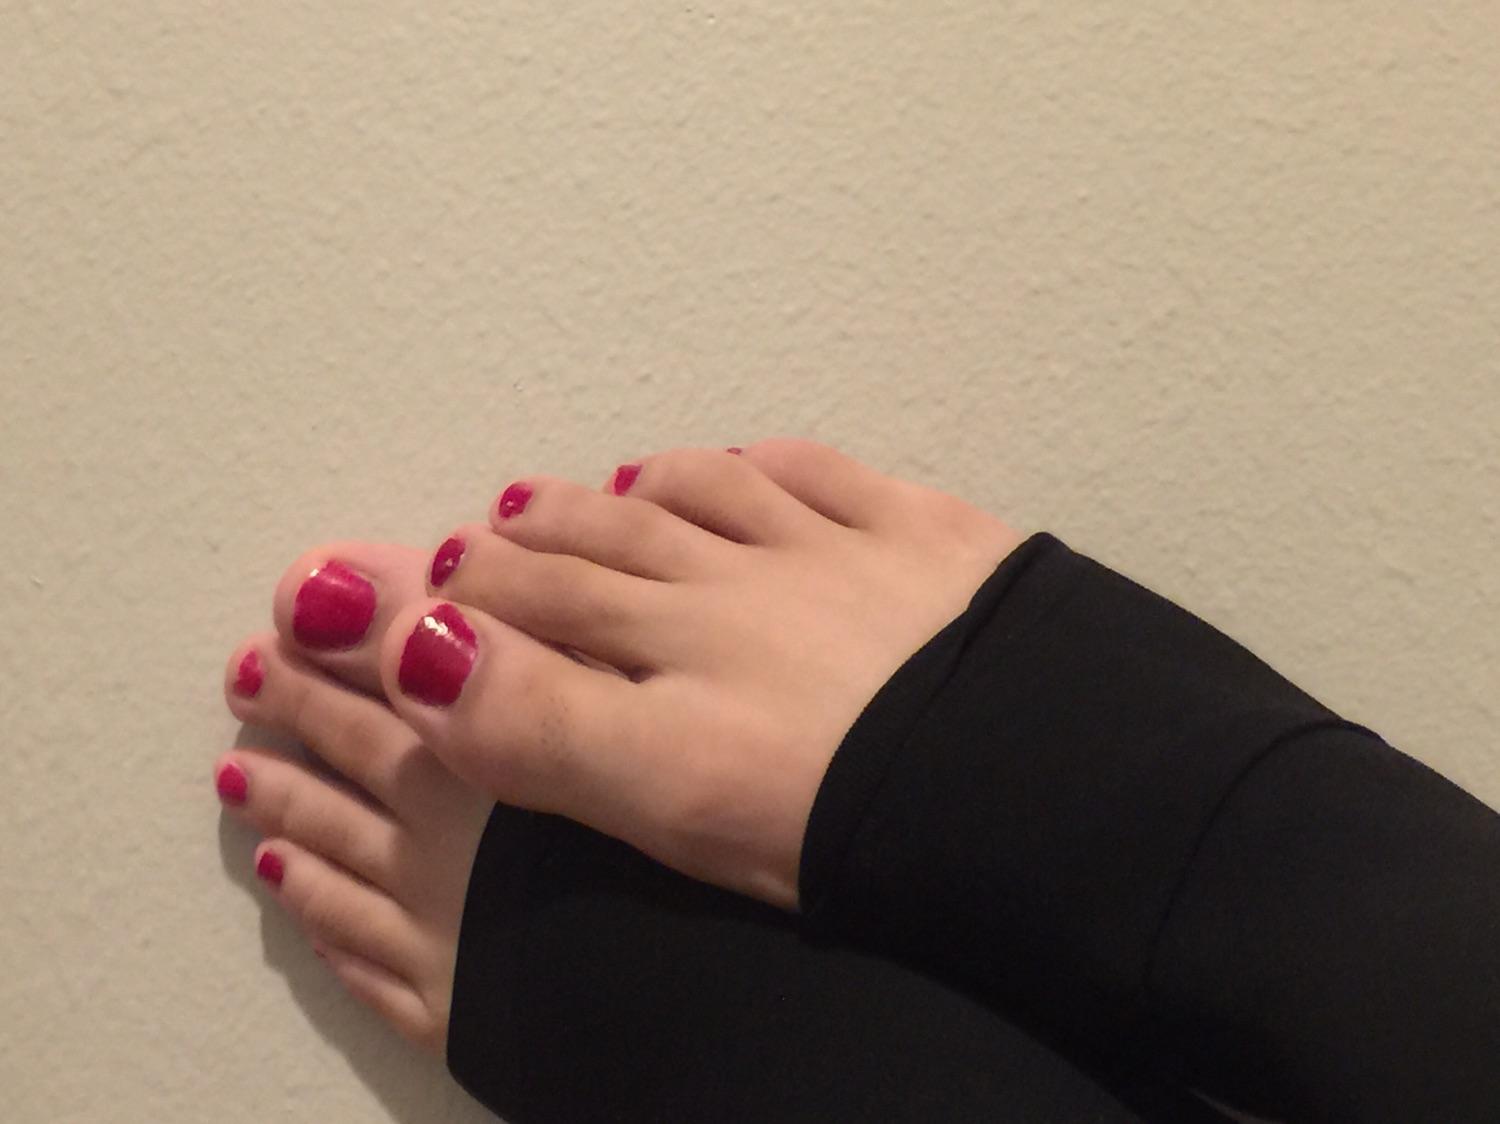 Old but gold Who will suck these toes